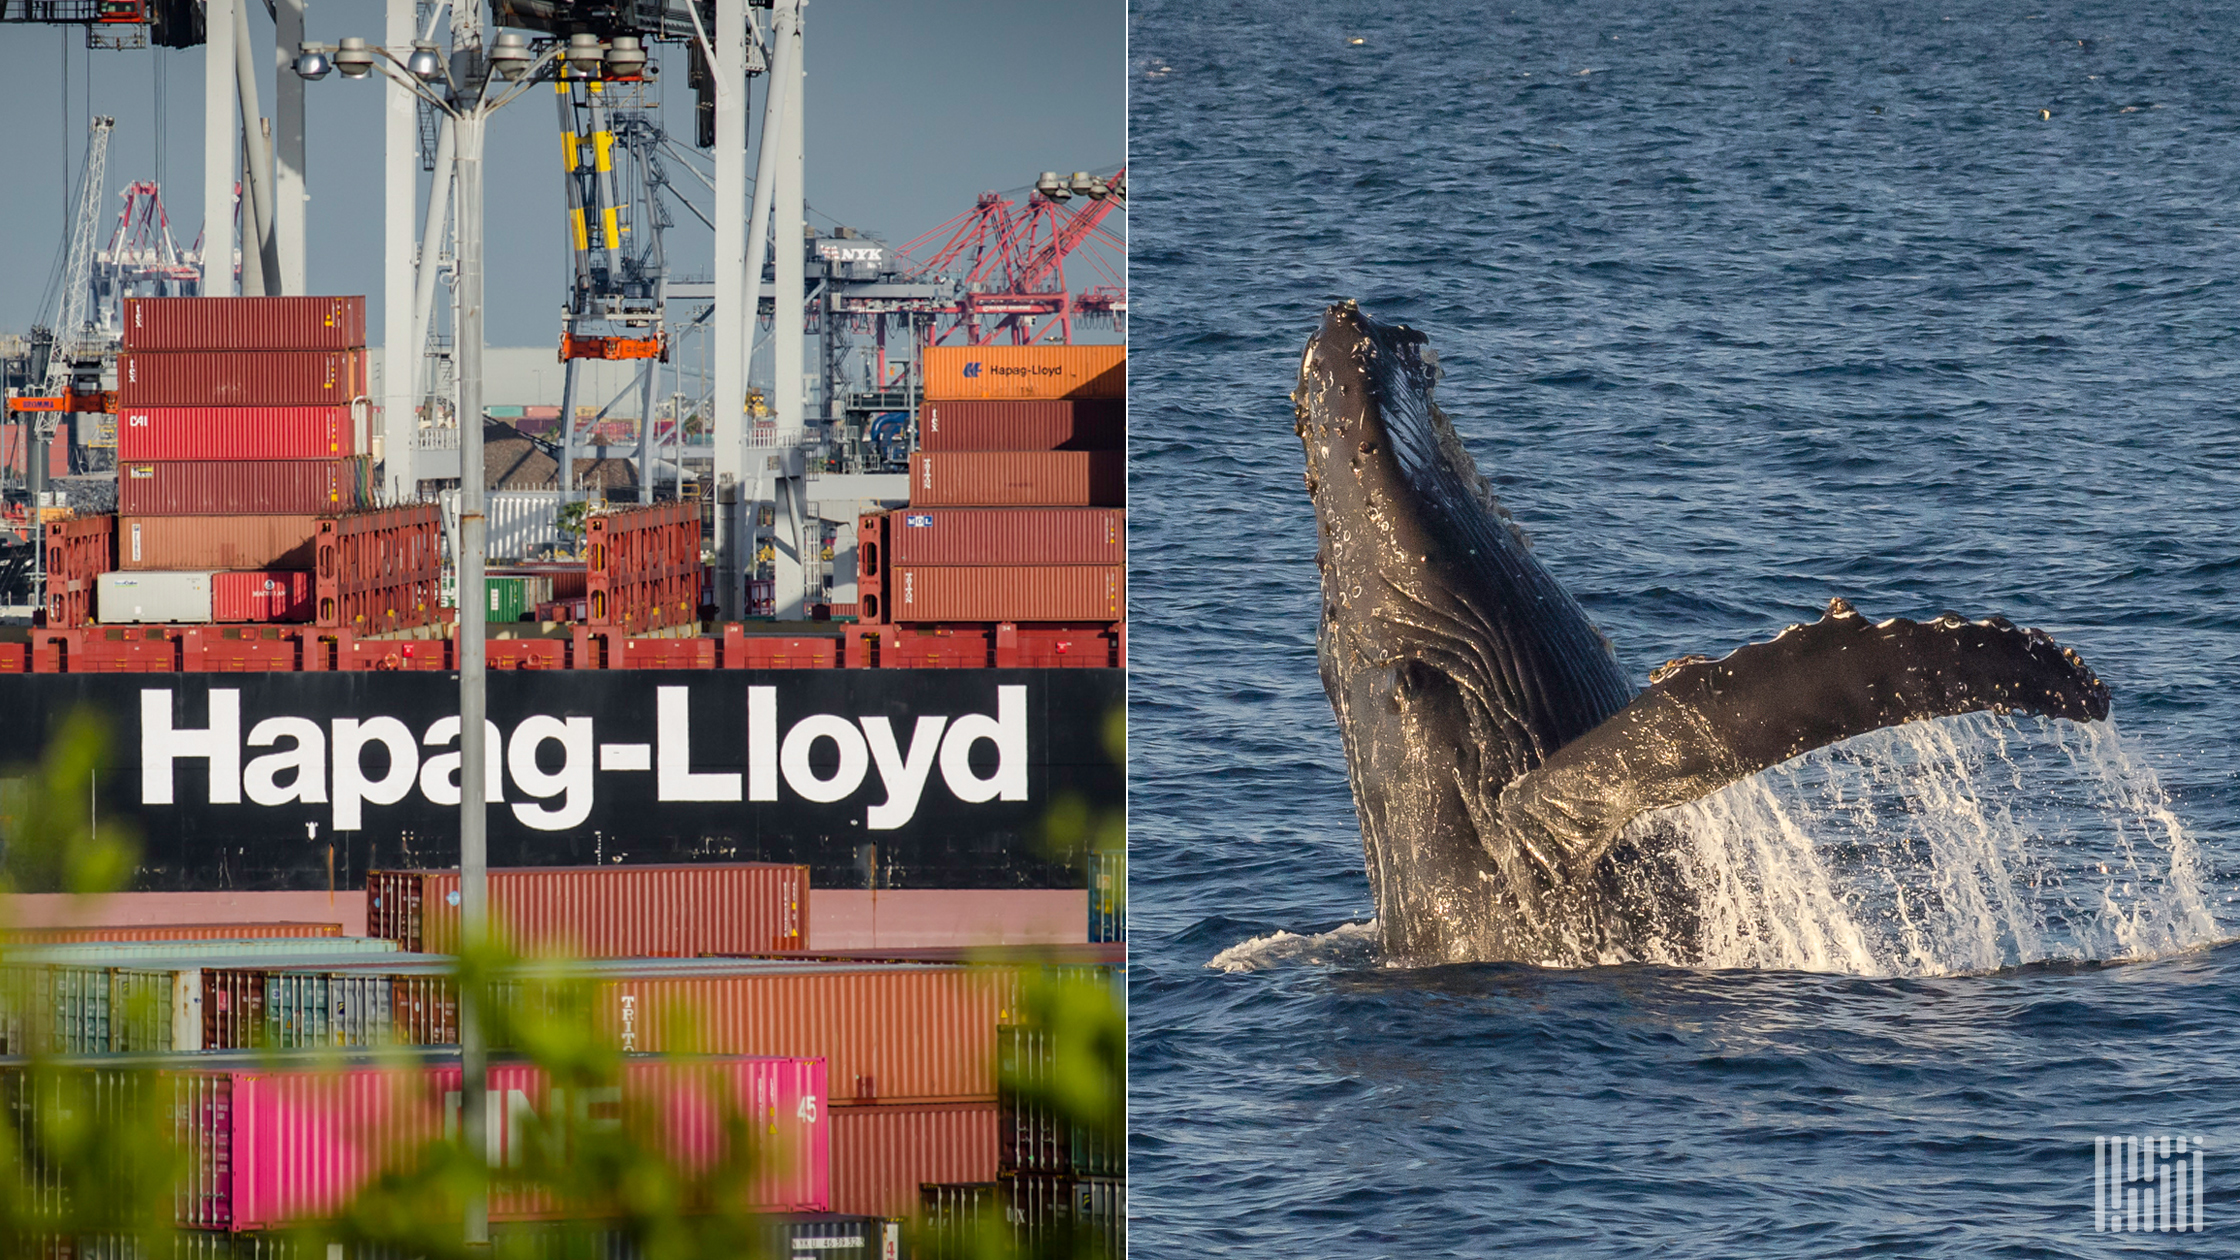 Hapag-Lloyd received a whale-safe award for environmental practices.